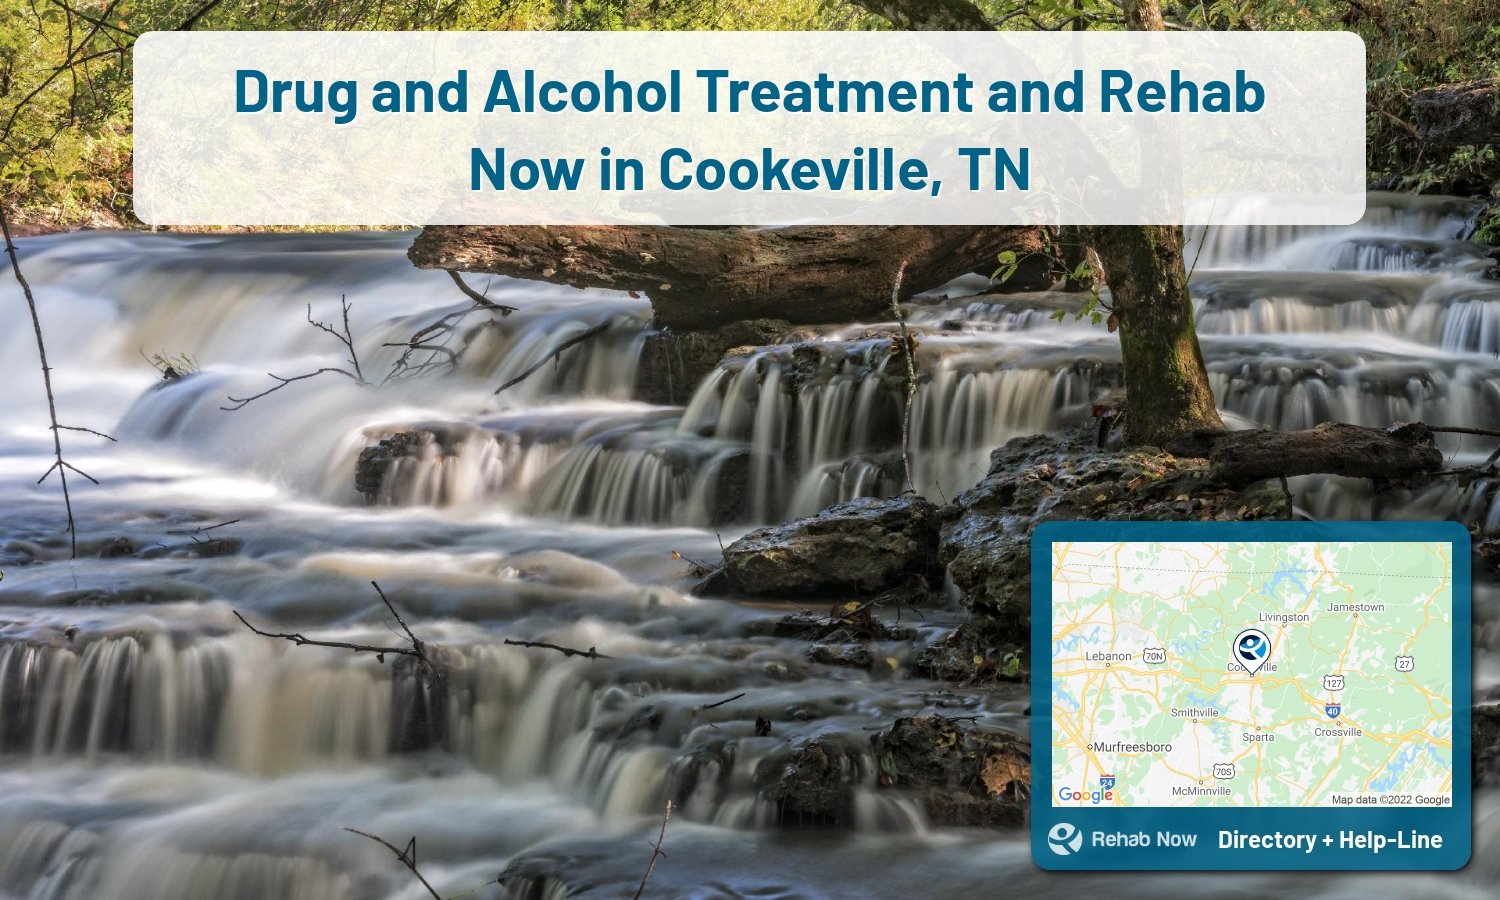 List of alcohol and drug treatment centers near you in Cookeville, Tennessee. Research certifications, programs, methods, pricing, and more.